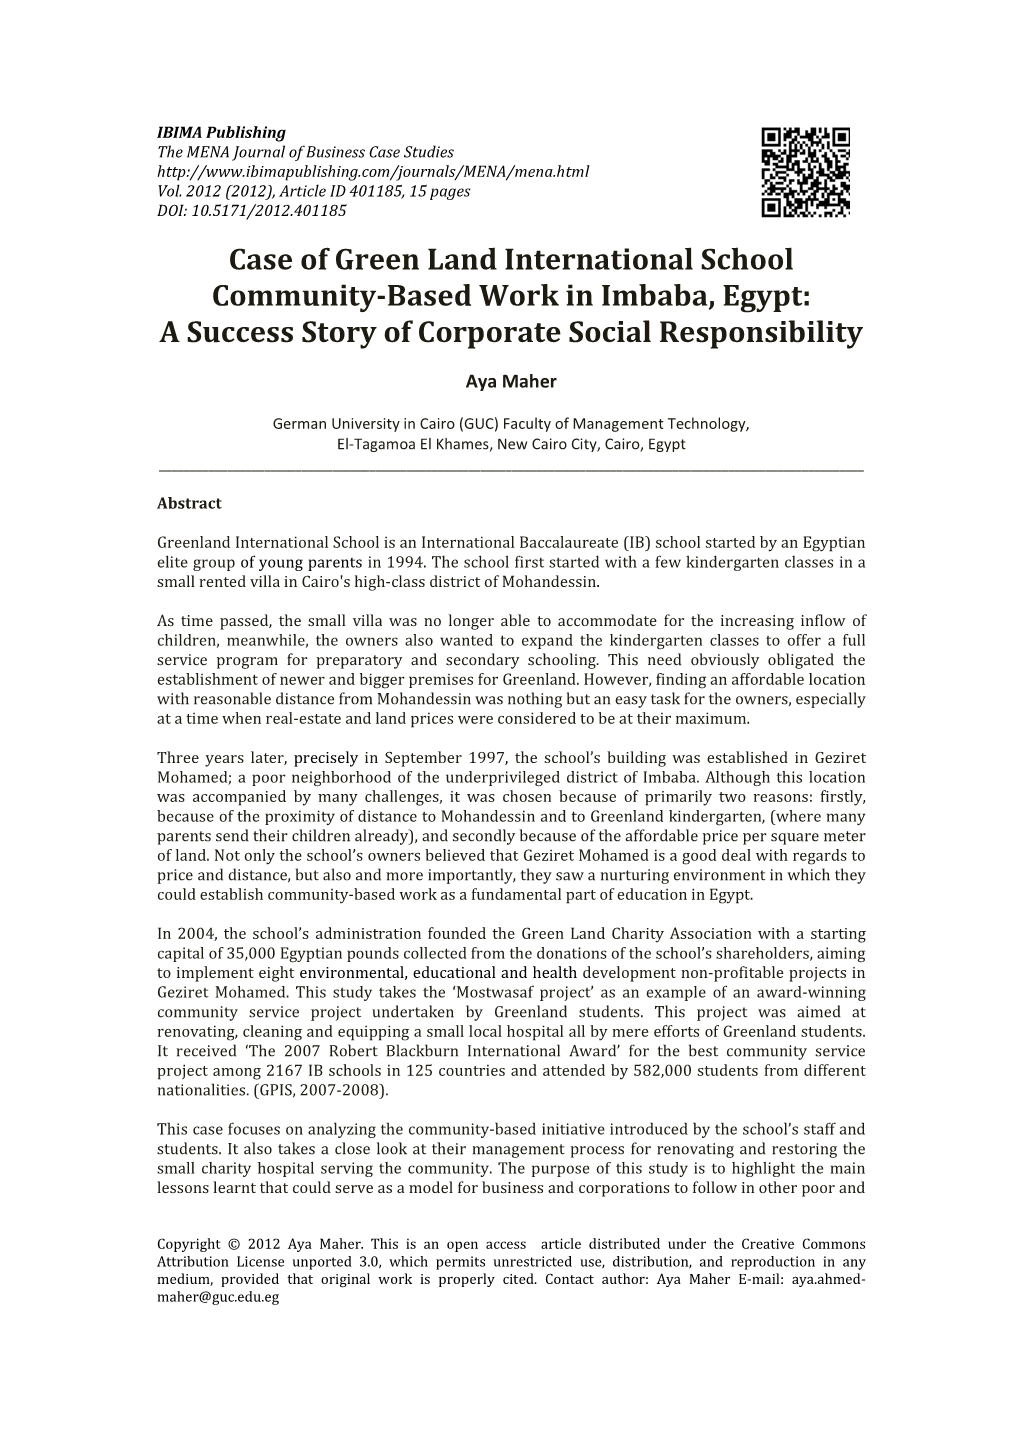 Case of Green Land International School Community-Based Work in Imbaba, Egypt: a Success Story of Corporate Social Responsibility